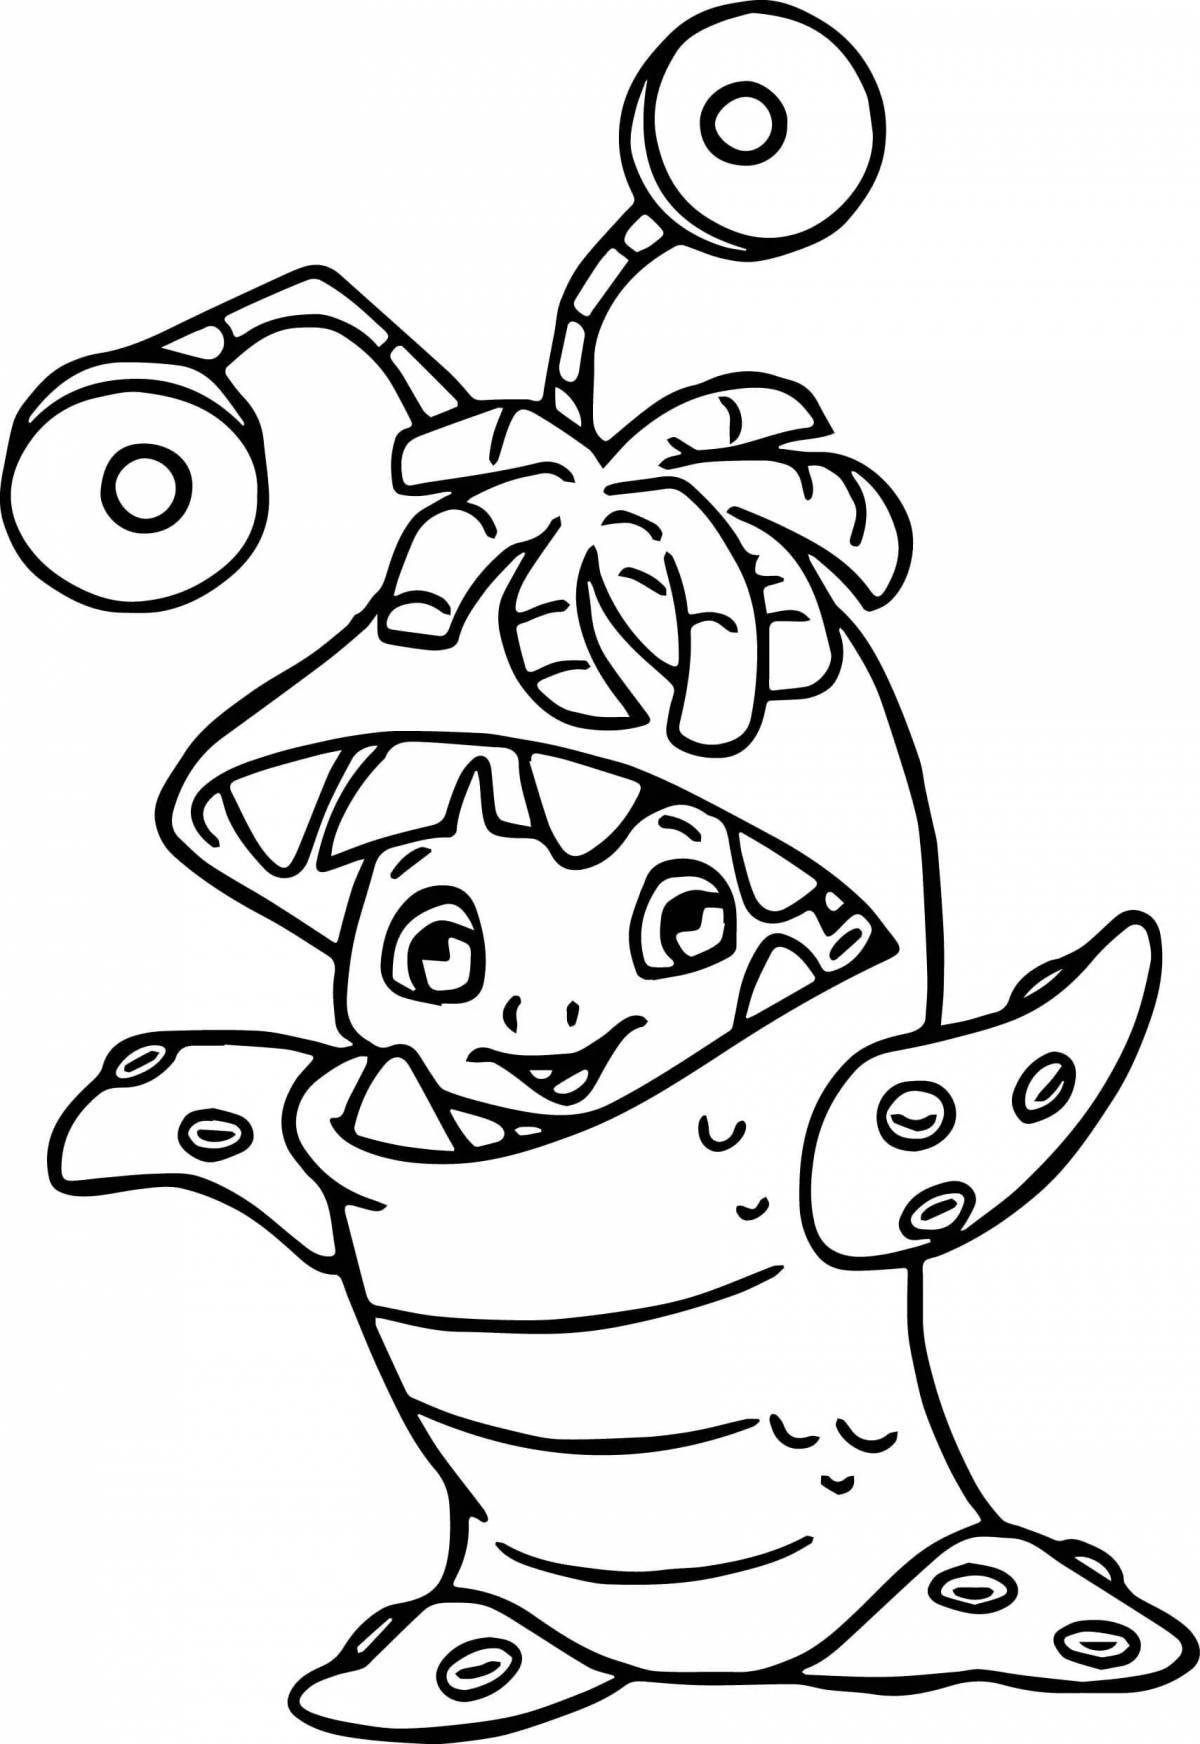 Adorable alien coloring pages for kids